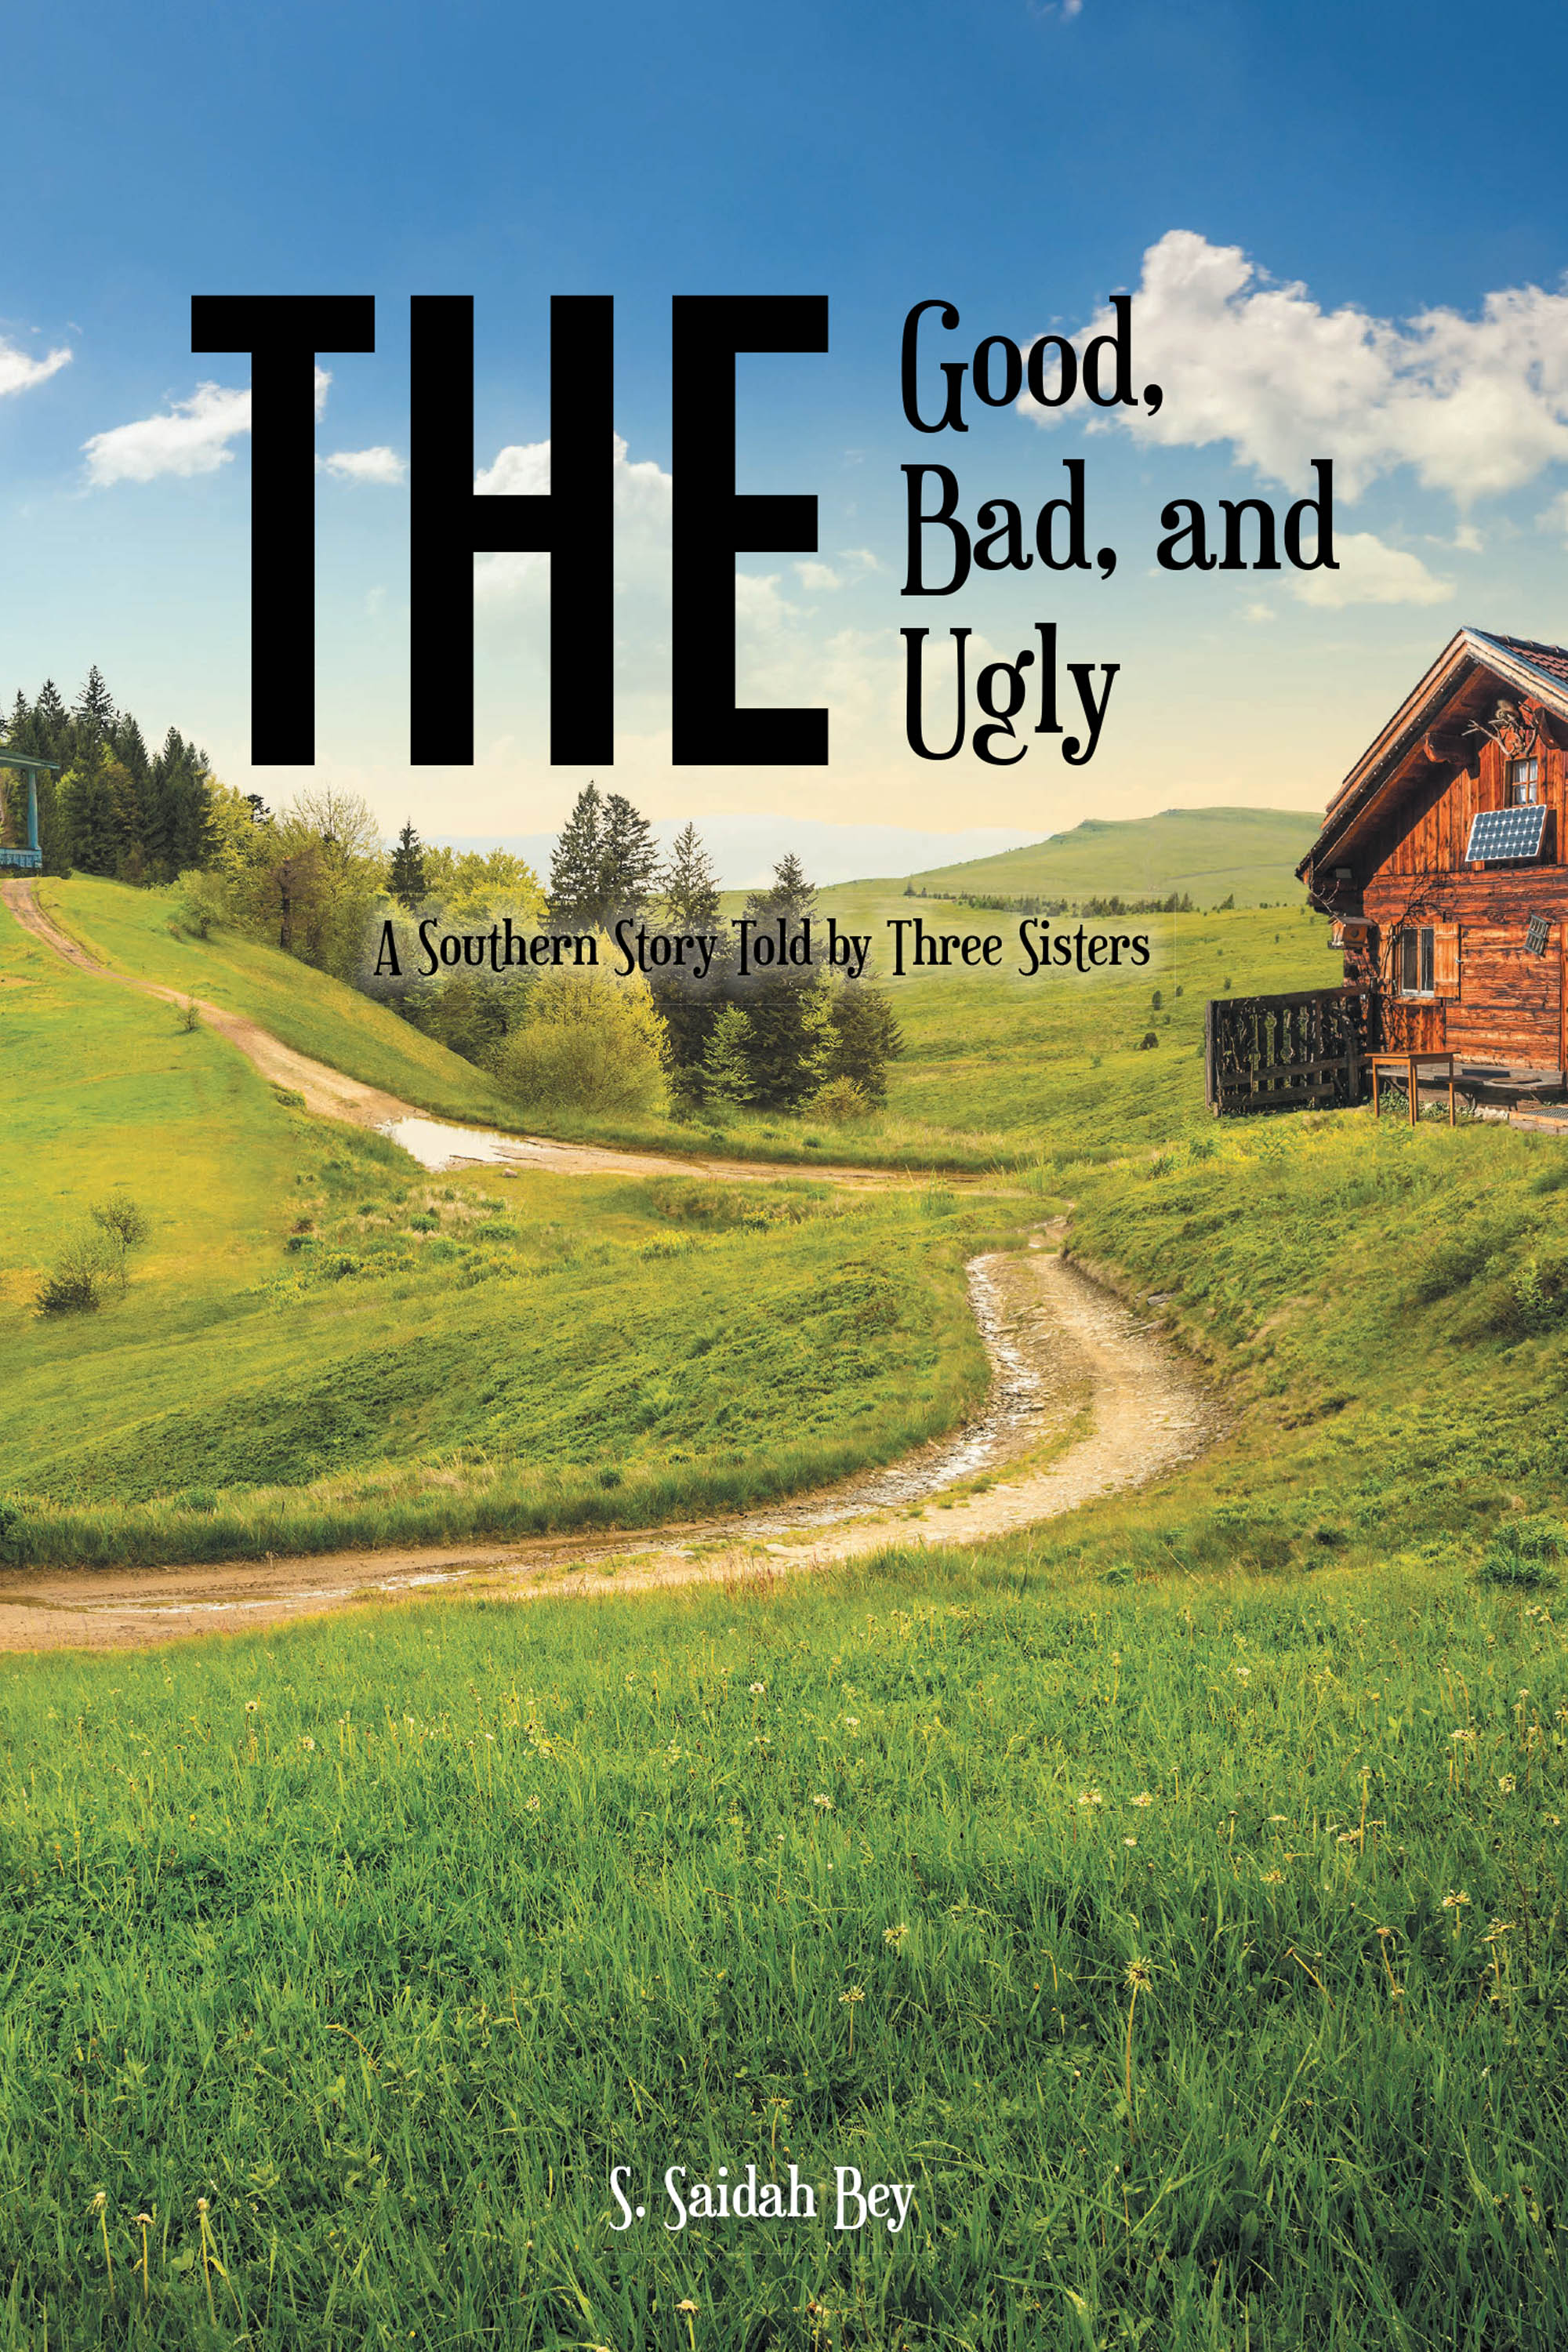 Author S. Saidah Bey’s New Book, "The Good, the Bad, and the Ugly: A Southern Story Told by Three Sisters," is an Unforgettable and Spiritual Autobiographical Work